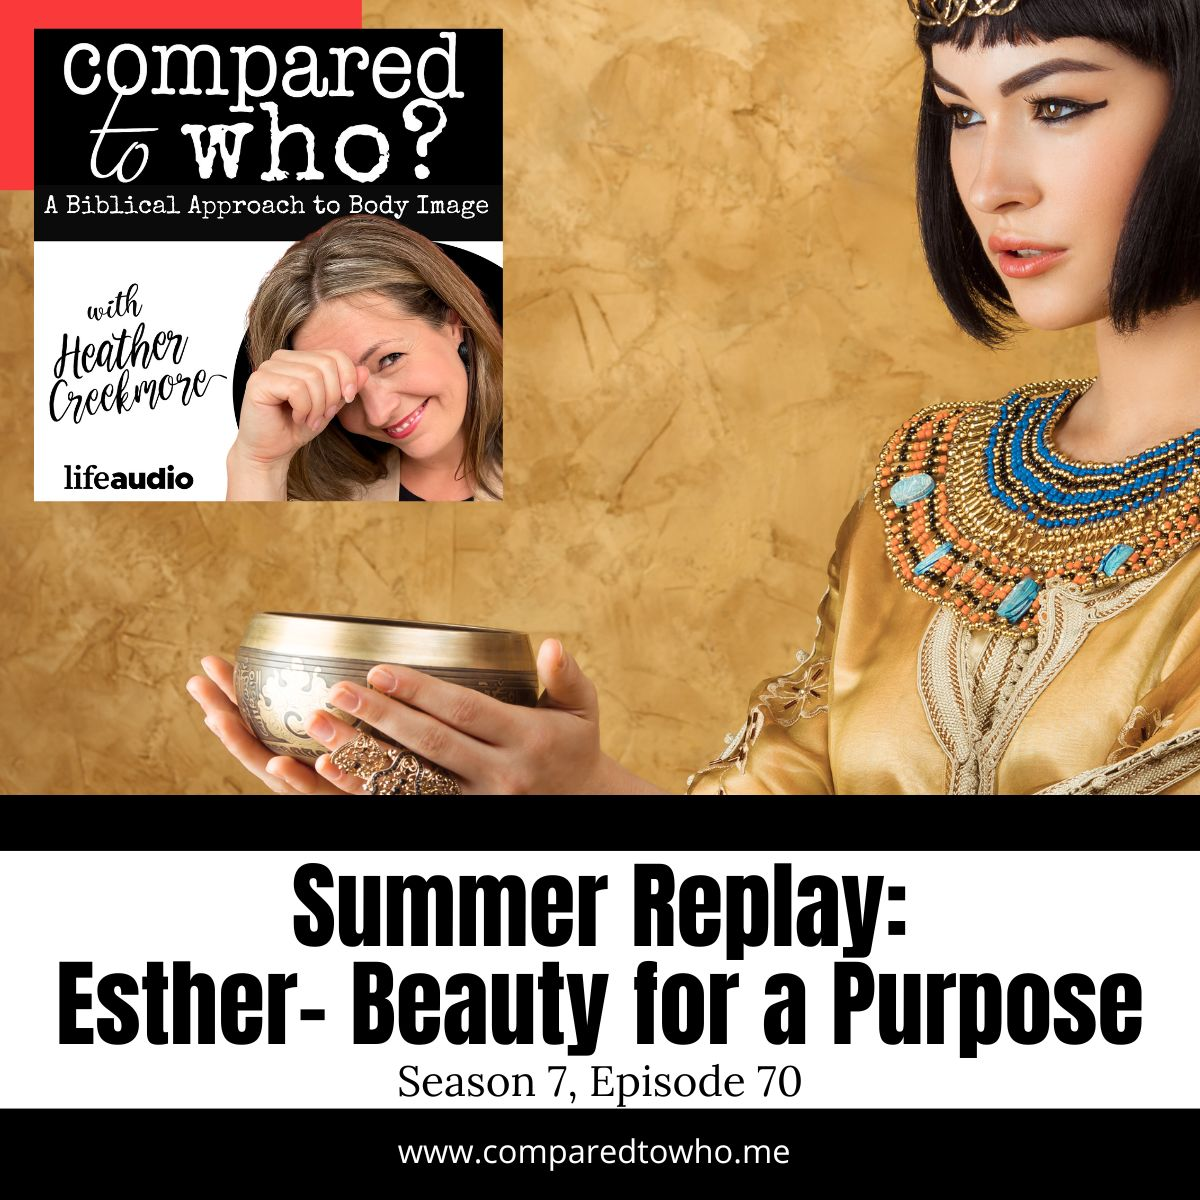 Summer Replay: Let's Talk About Esther's Beauty